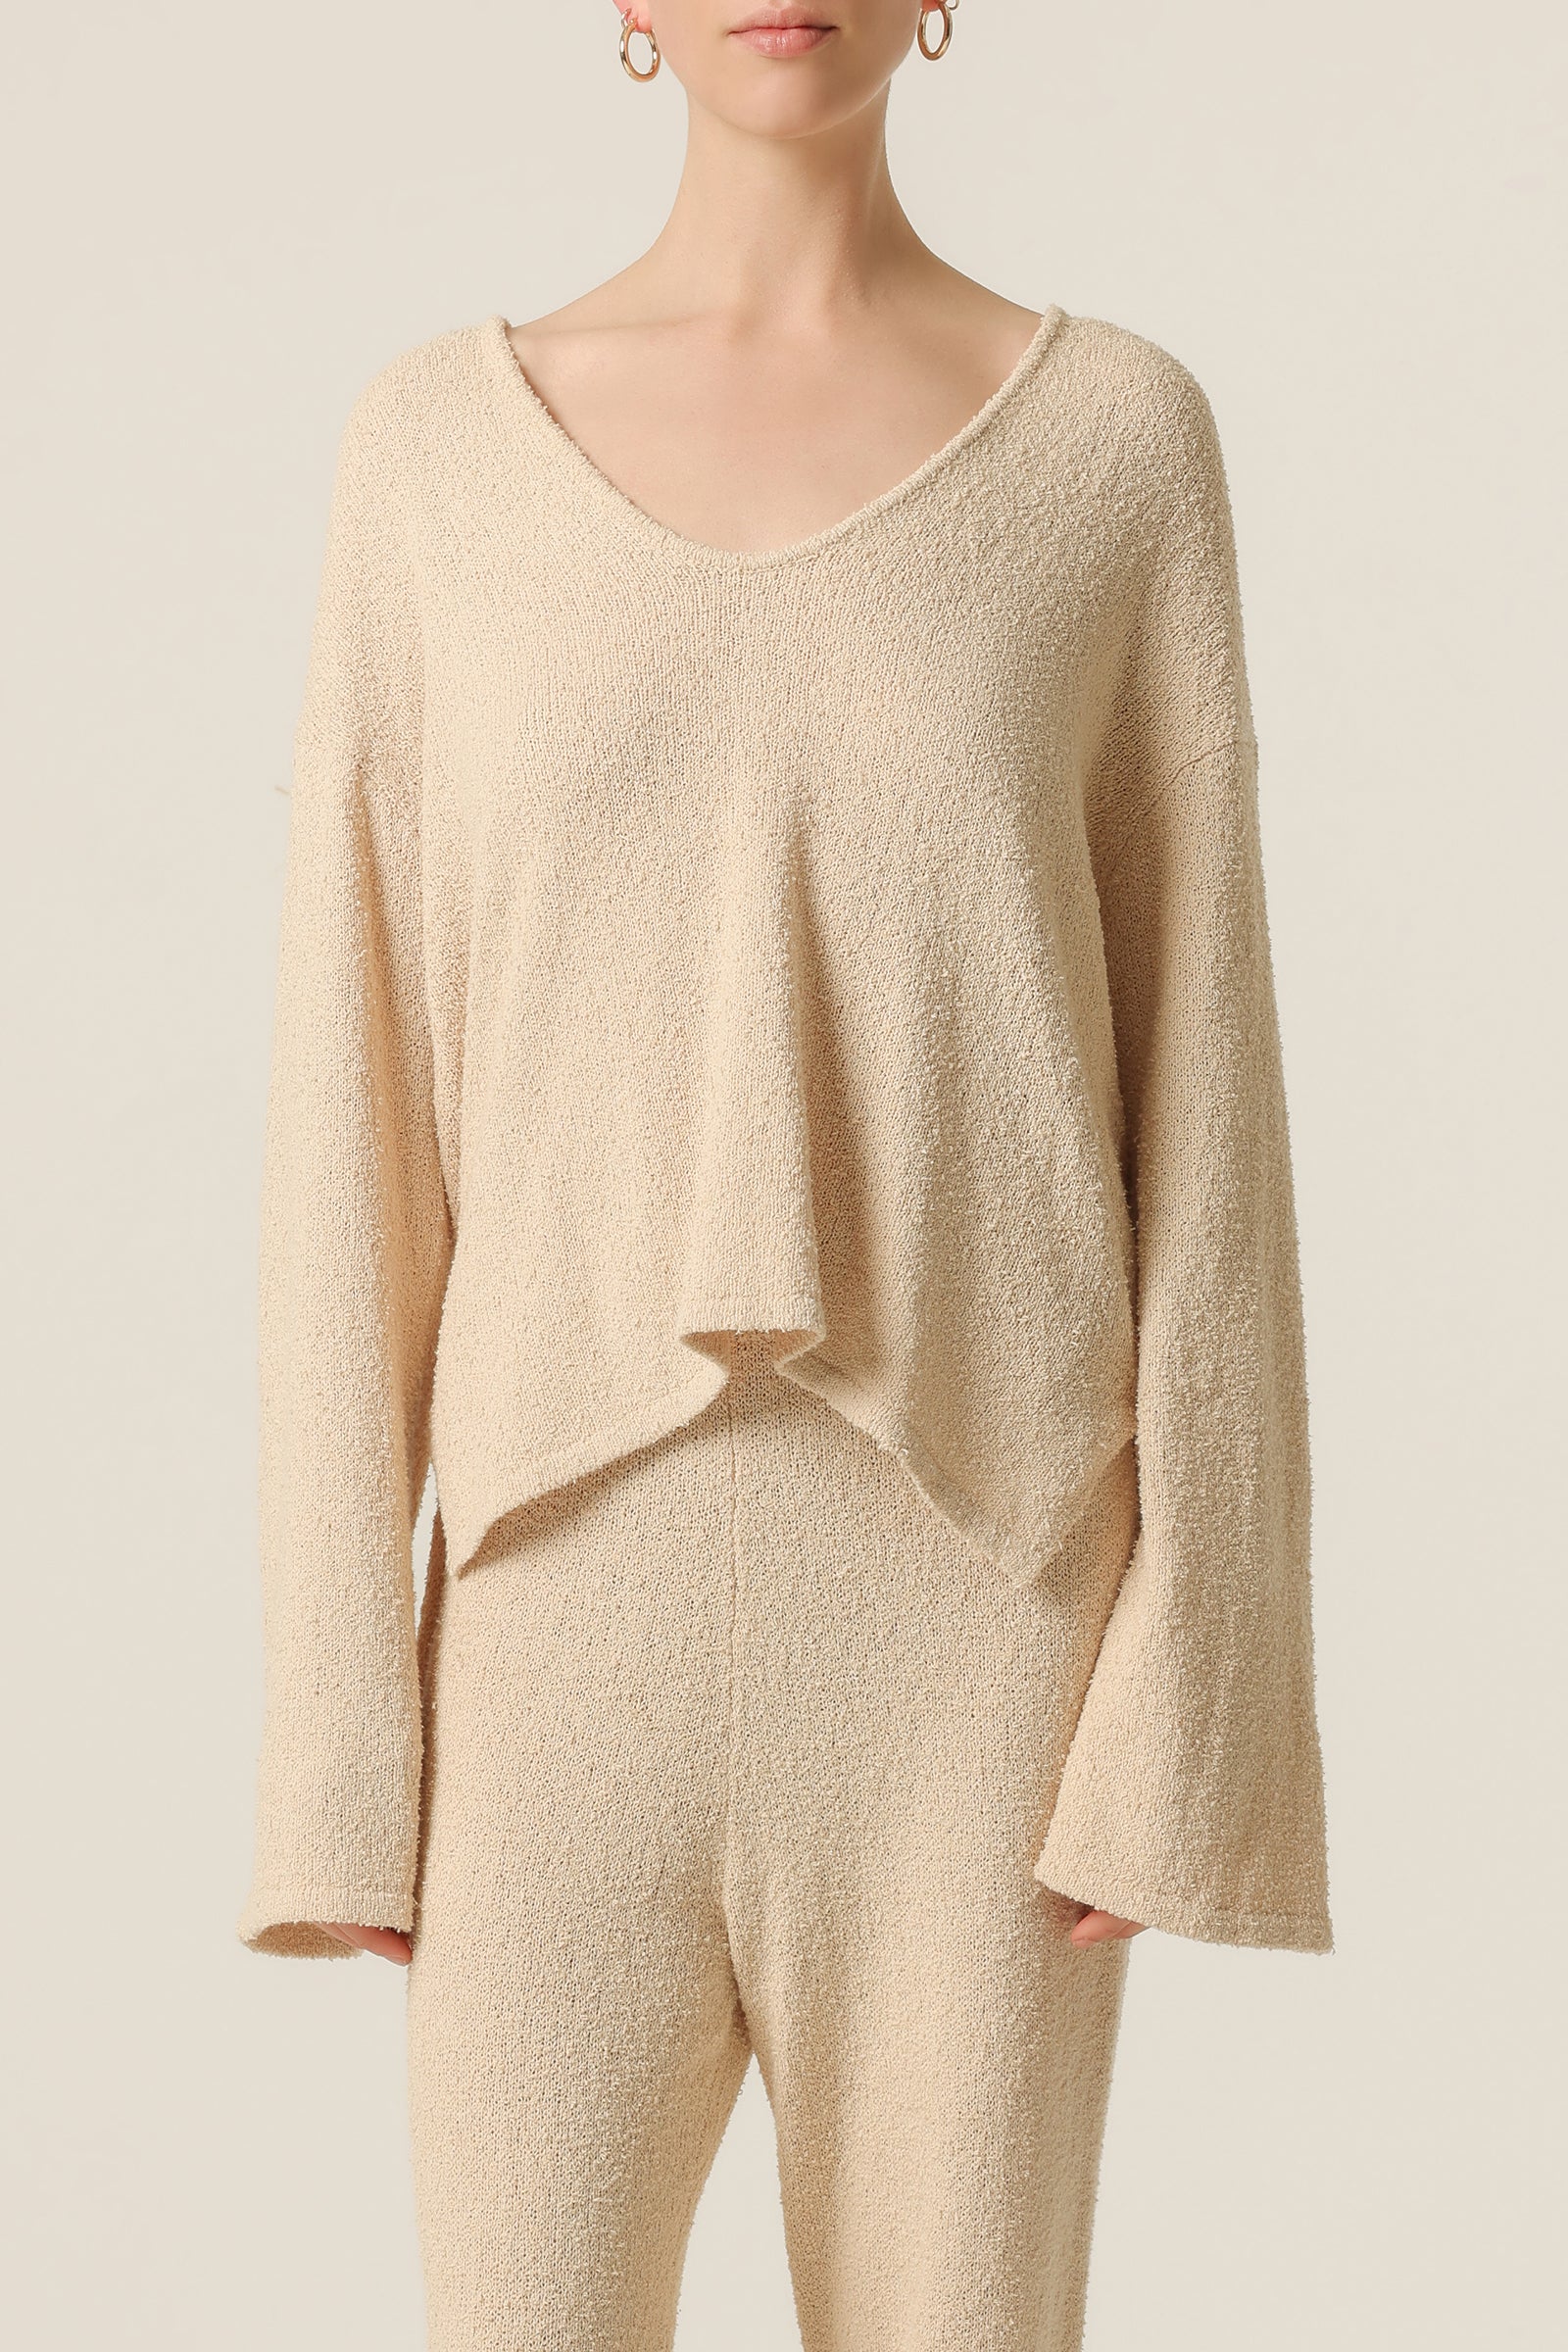 Nude Lucy Blaine Knit Top In White Cloud 